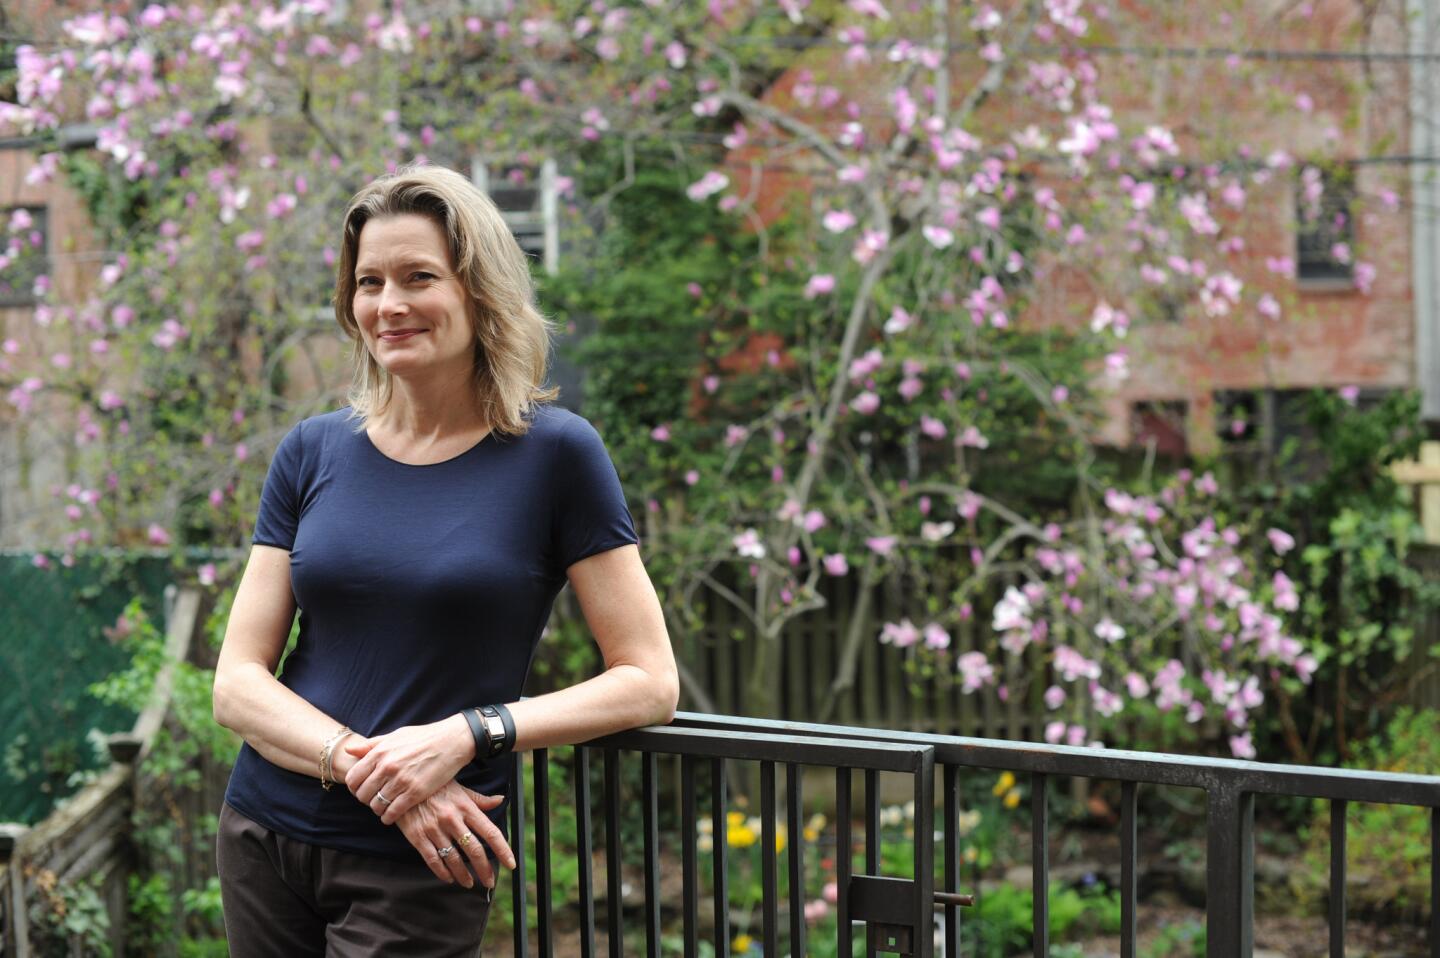 In 2011, Jennifer Egan won the Pulitzer Prize for fiction for "A Visit From the Goon Squad."